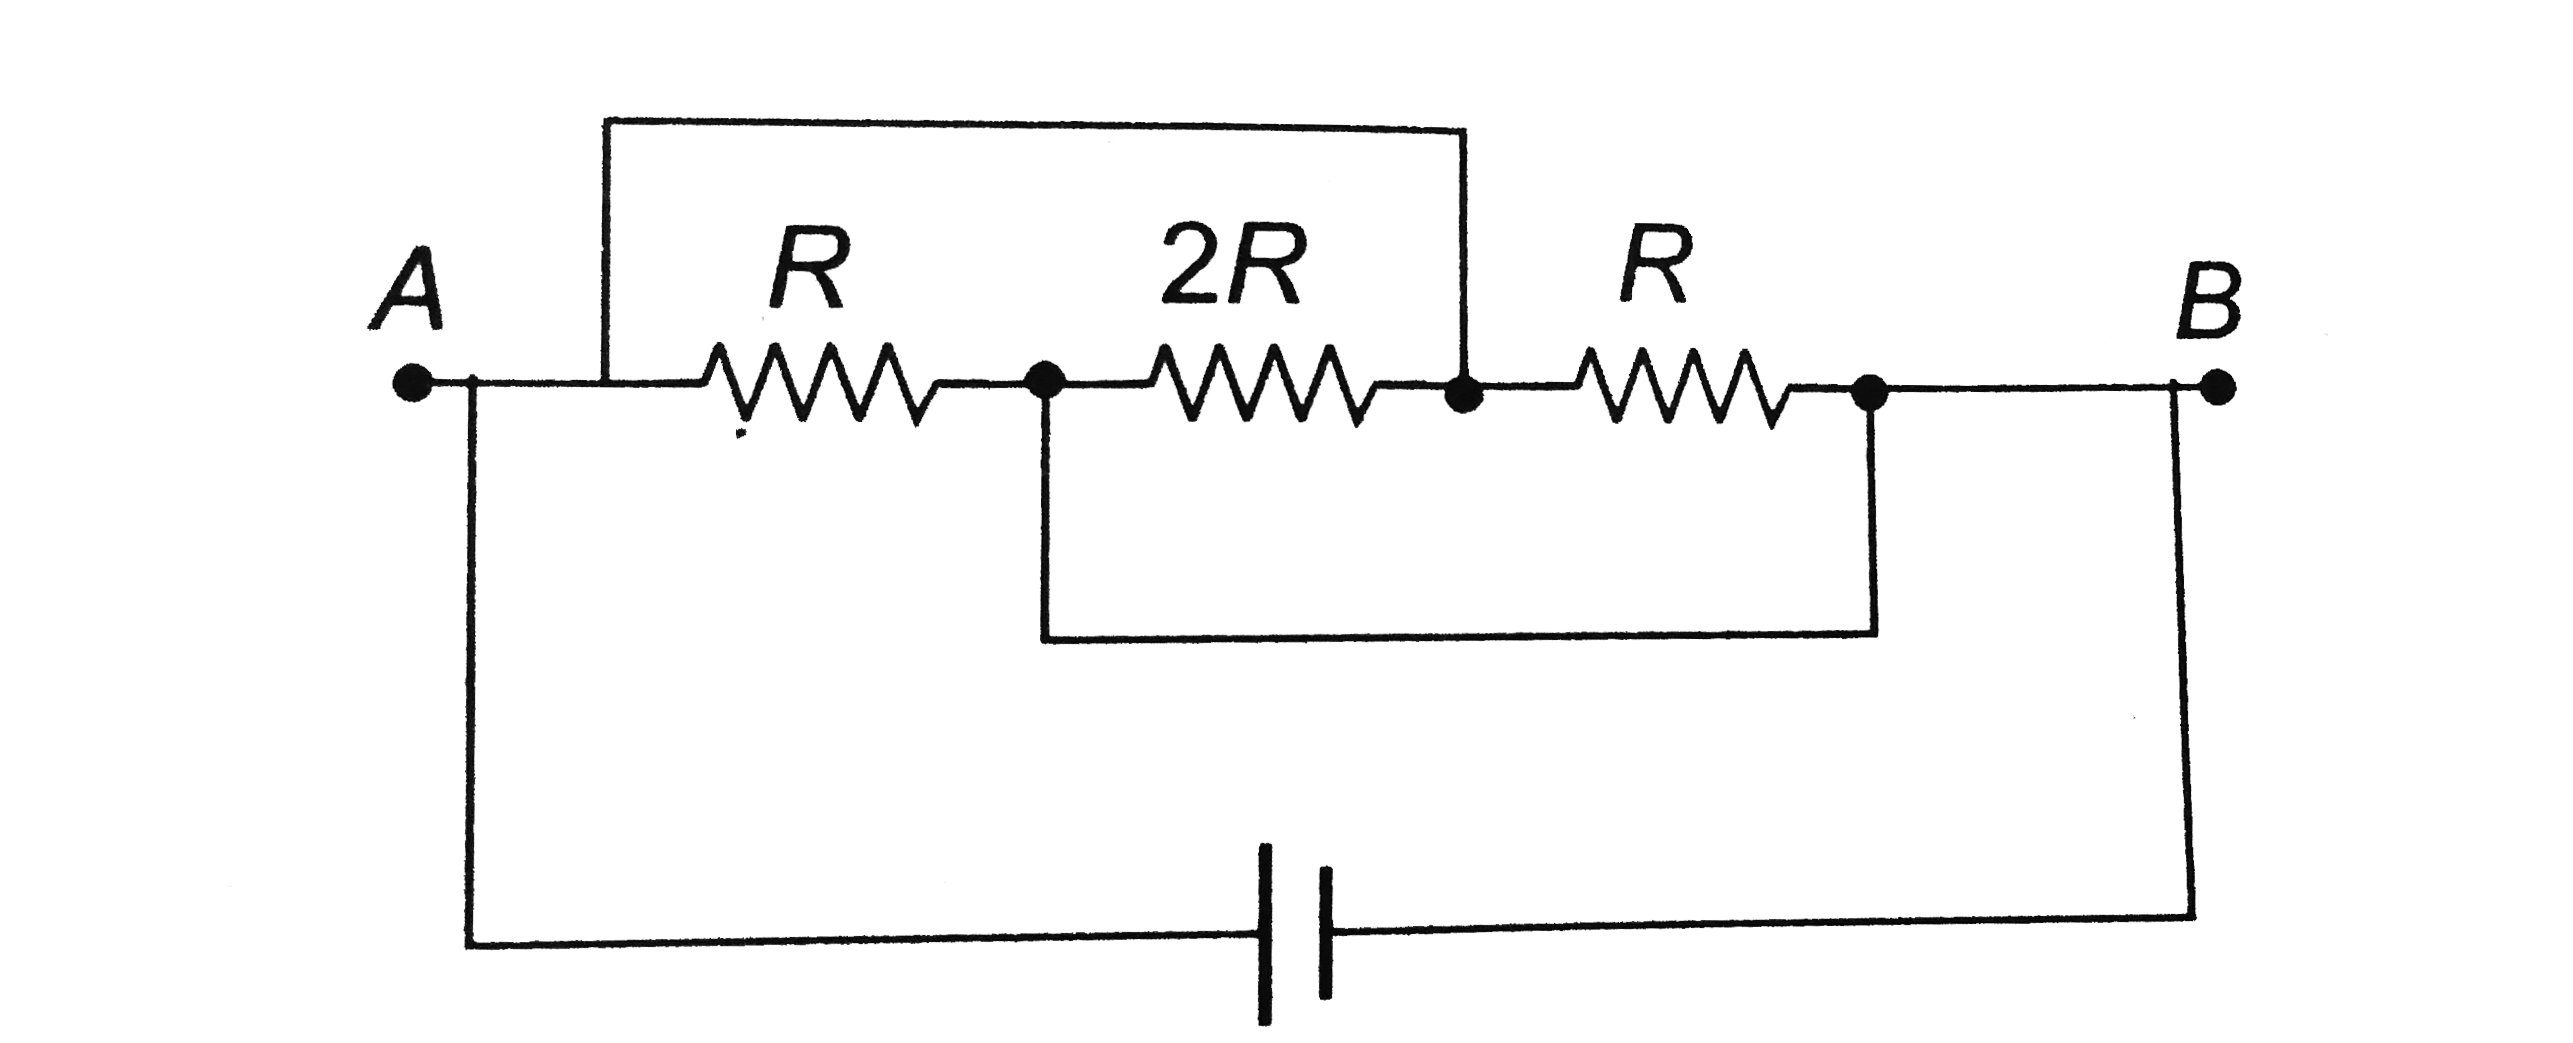 In the figure shown the current flowing 2 R is: